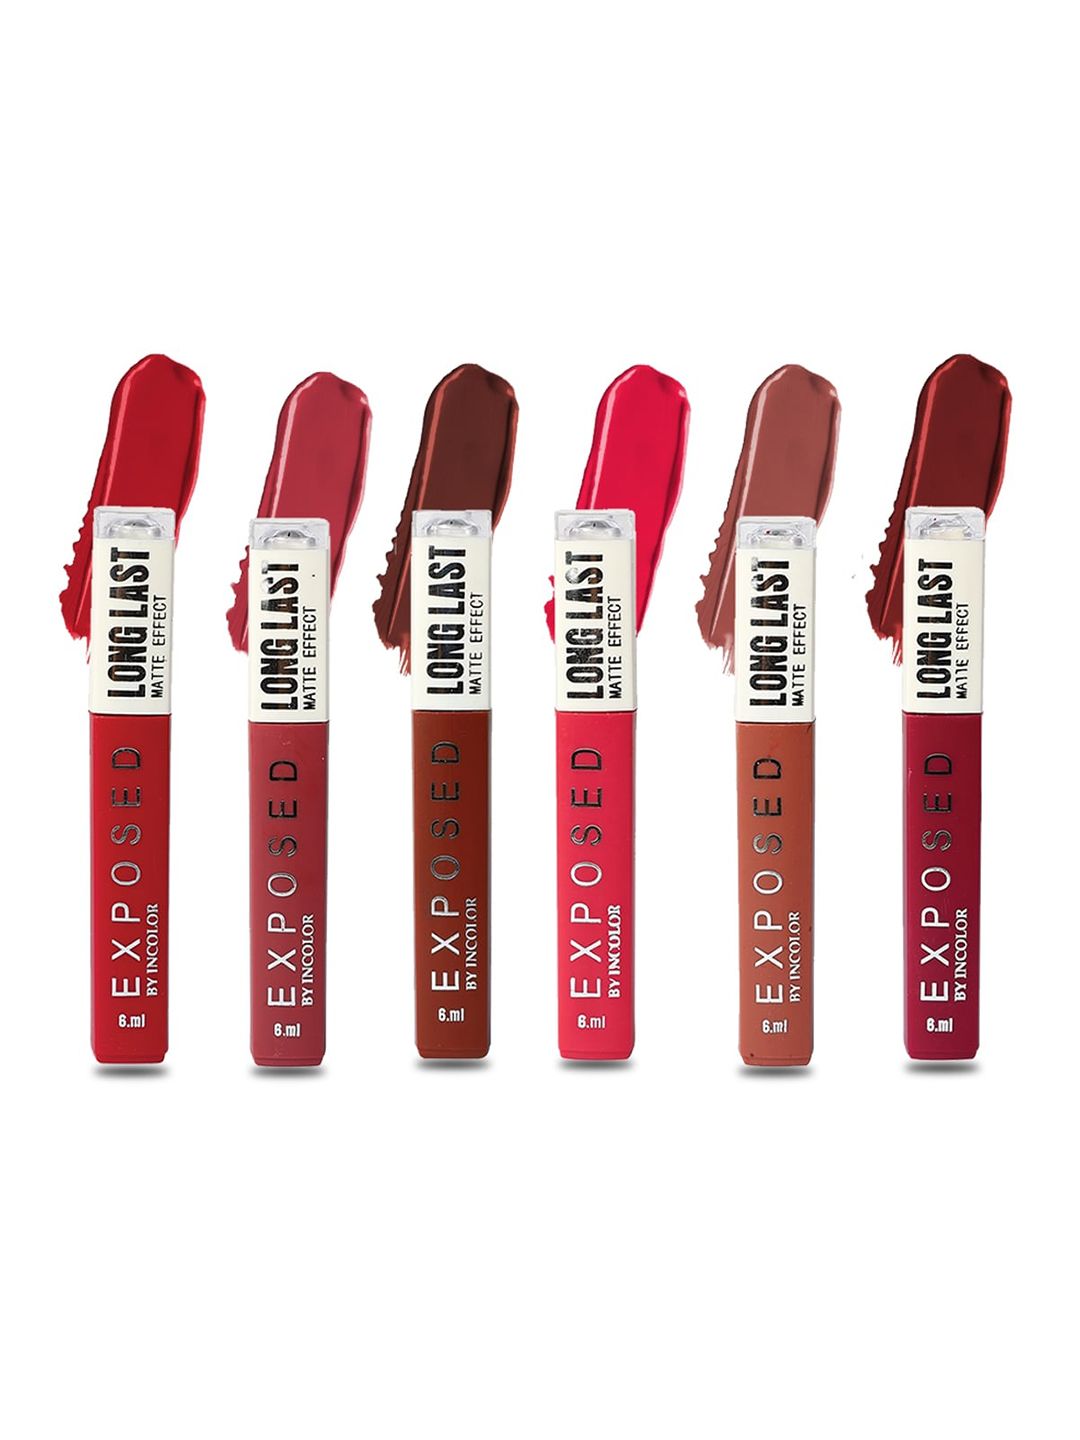 INCOLOR Set of 6 Exposed Long Last Matte Effect Lip Gloss 6 ml Each - Combo 01 Price in India